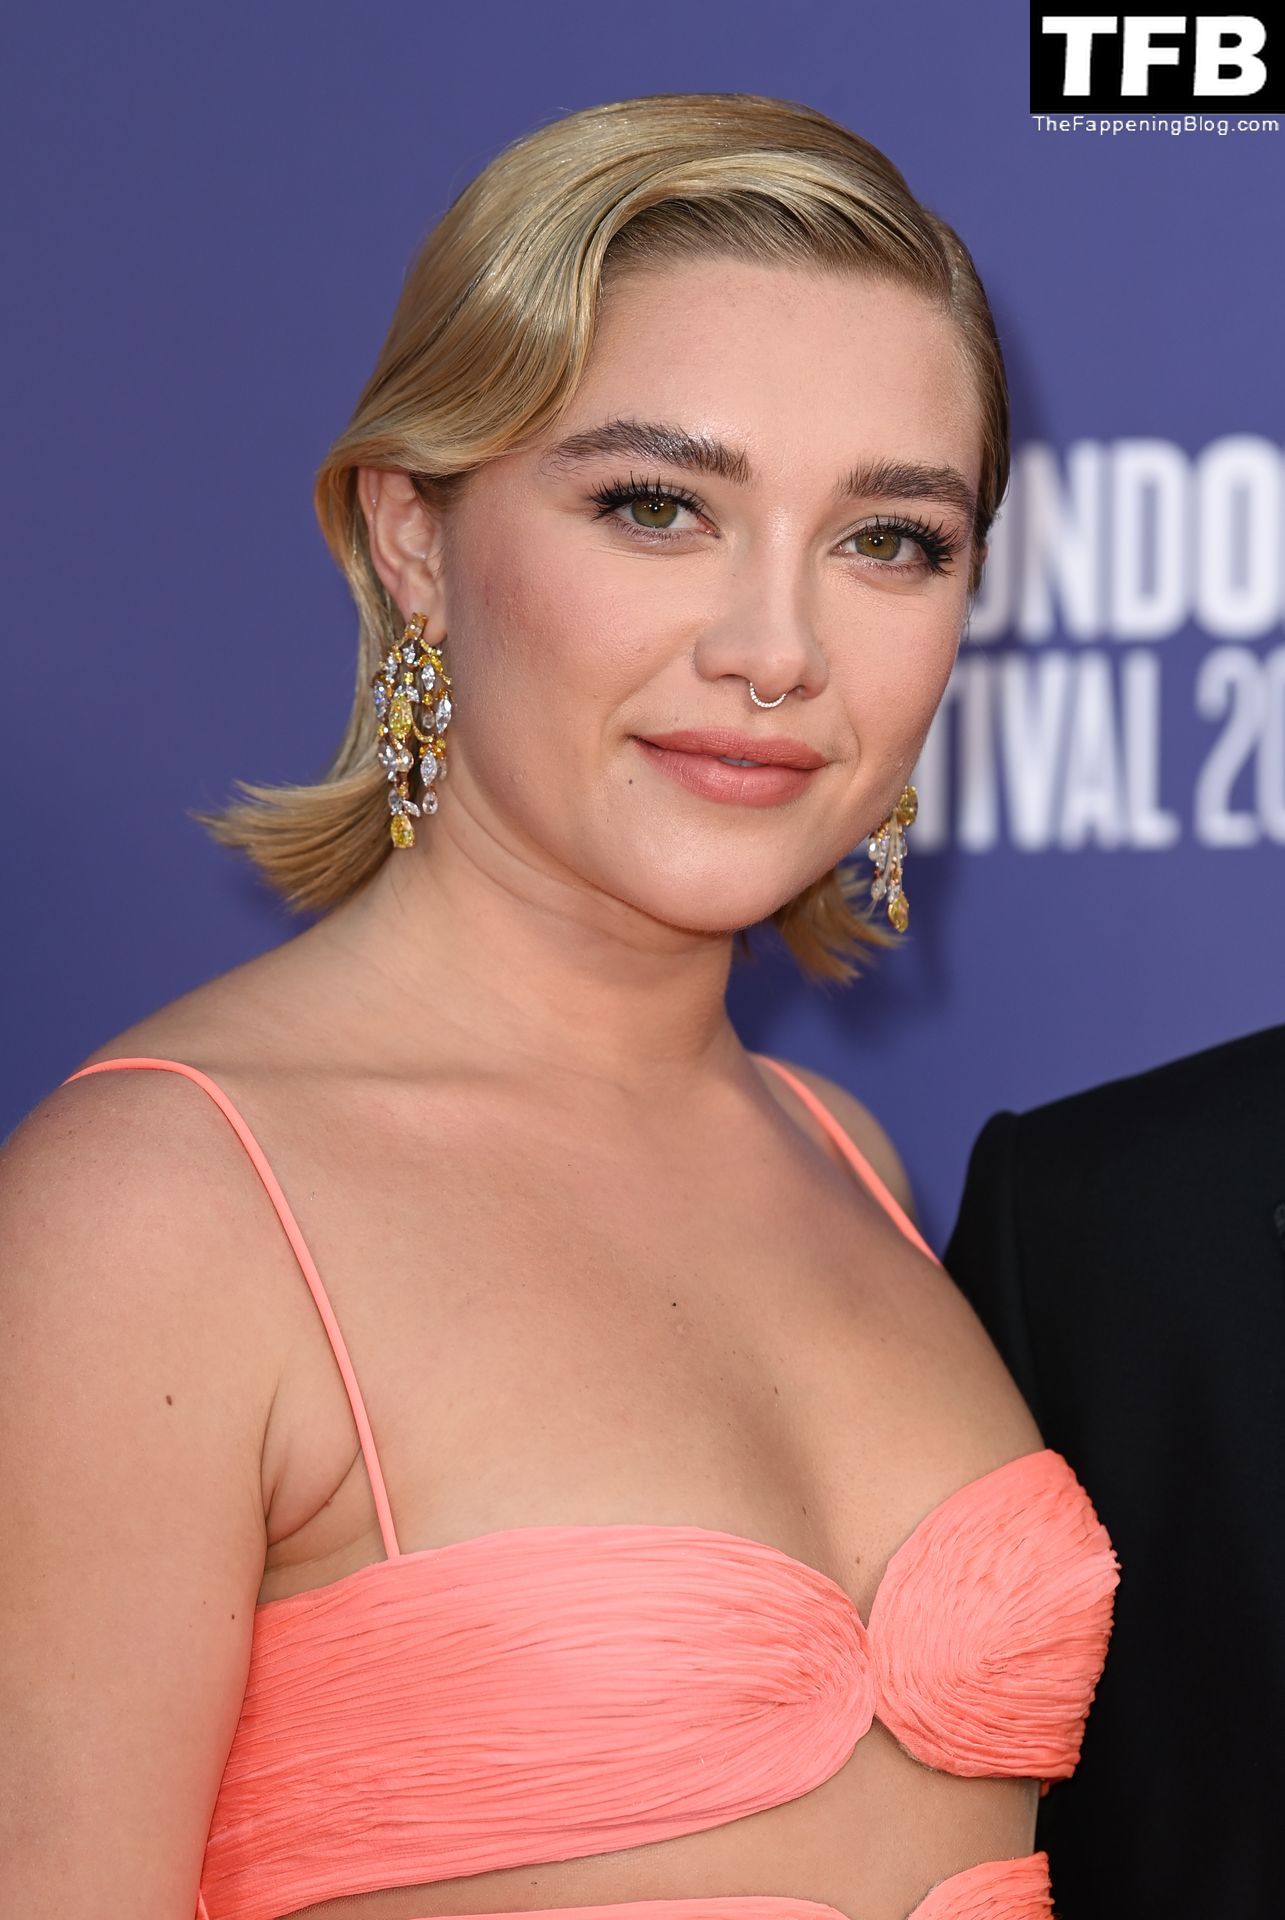 Florence-Pugh-Sexy-The-Fappening-Blog-43-1.jpg